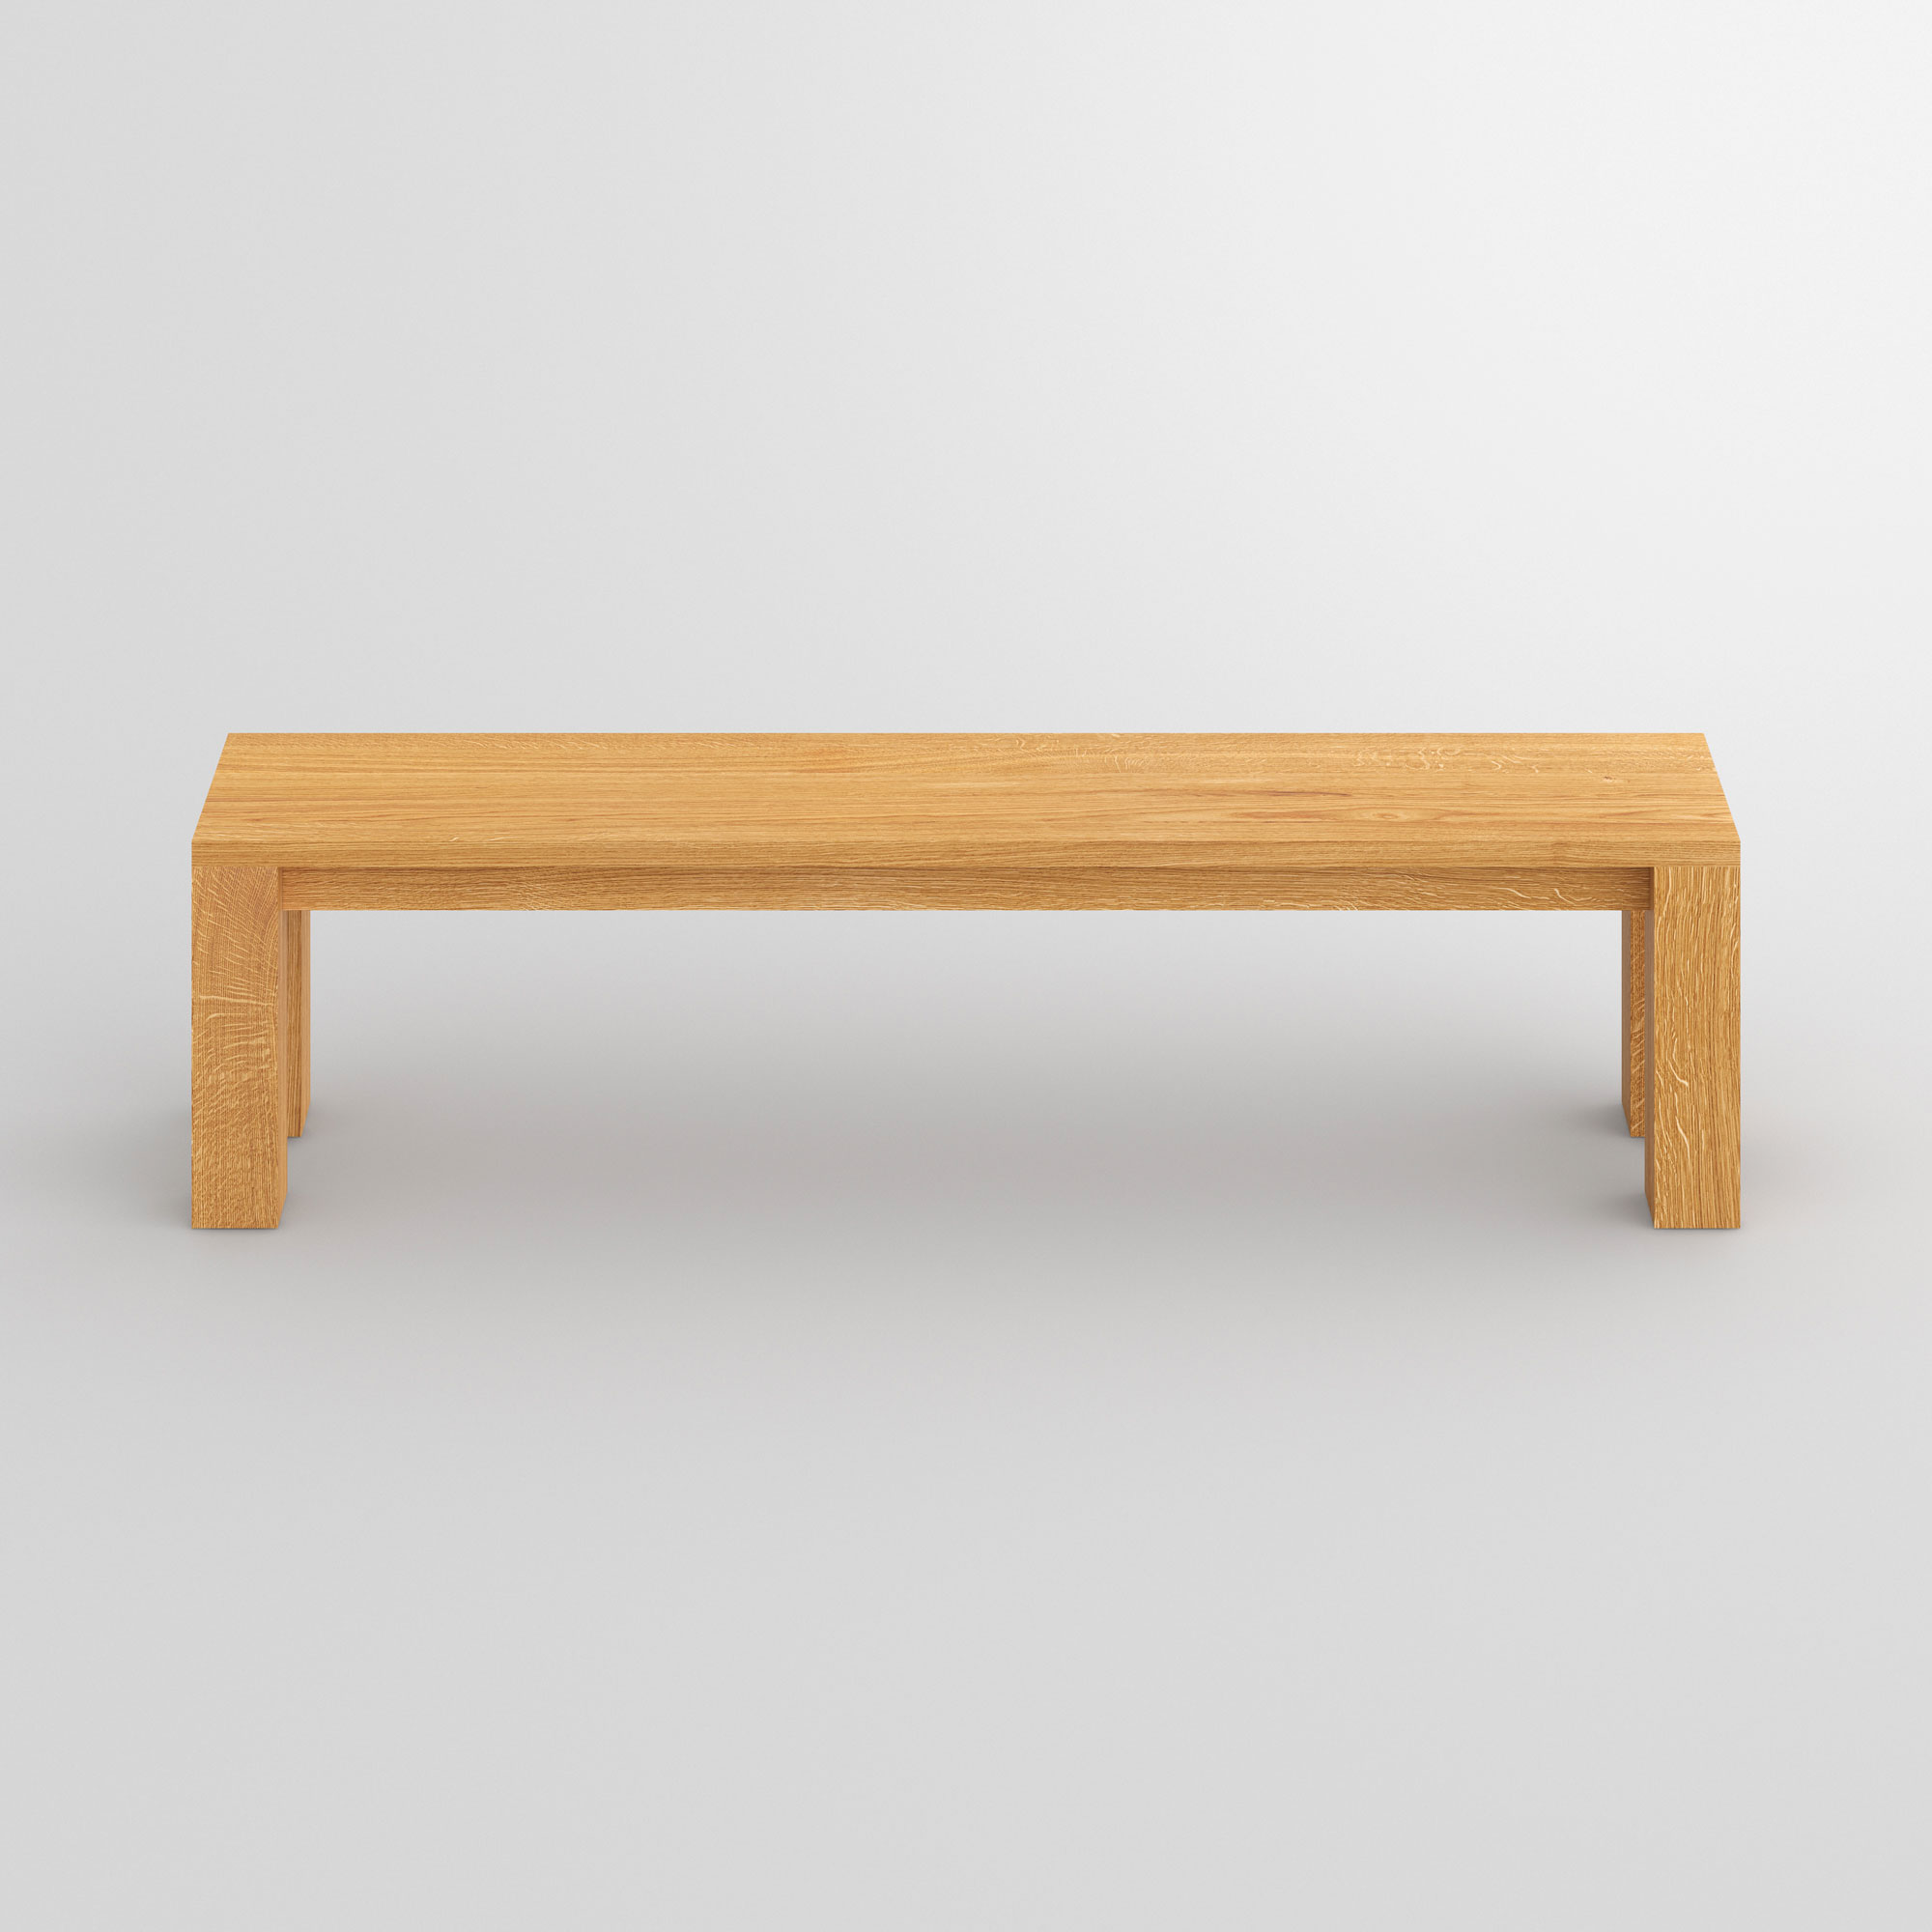 Rustic Wooden Bench CUBUS 3 cam2 custom made in solid wood by vitamin design